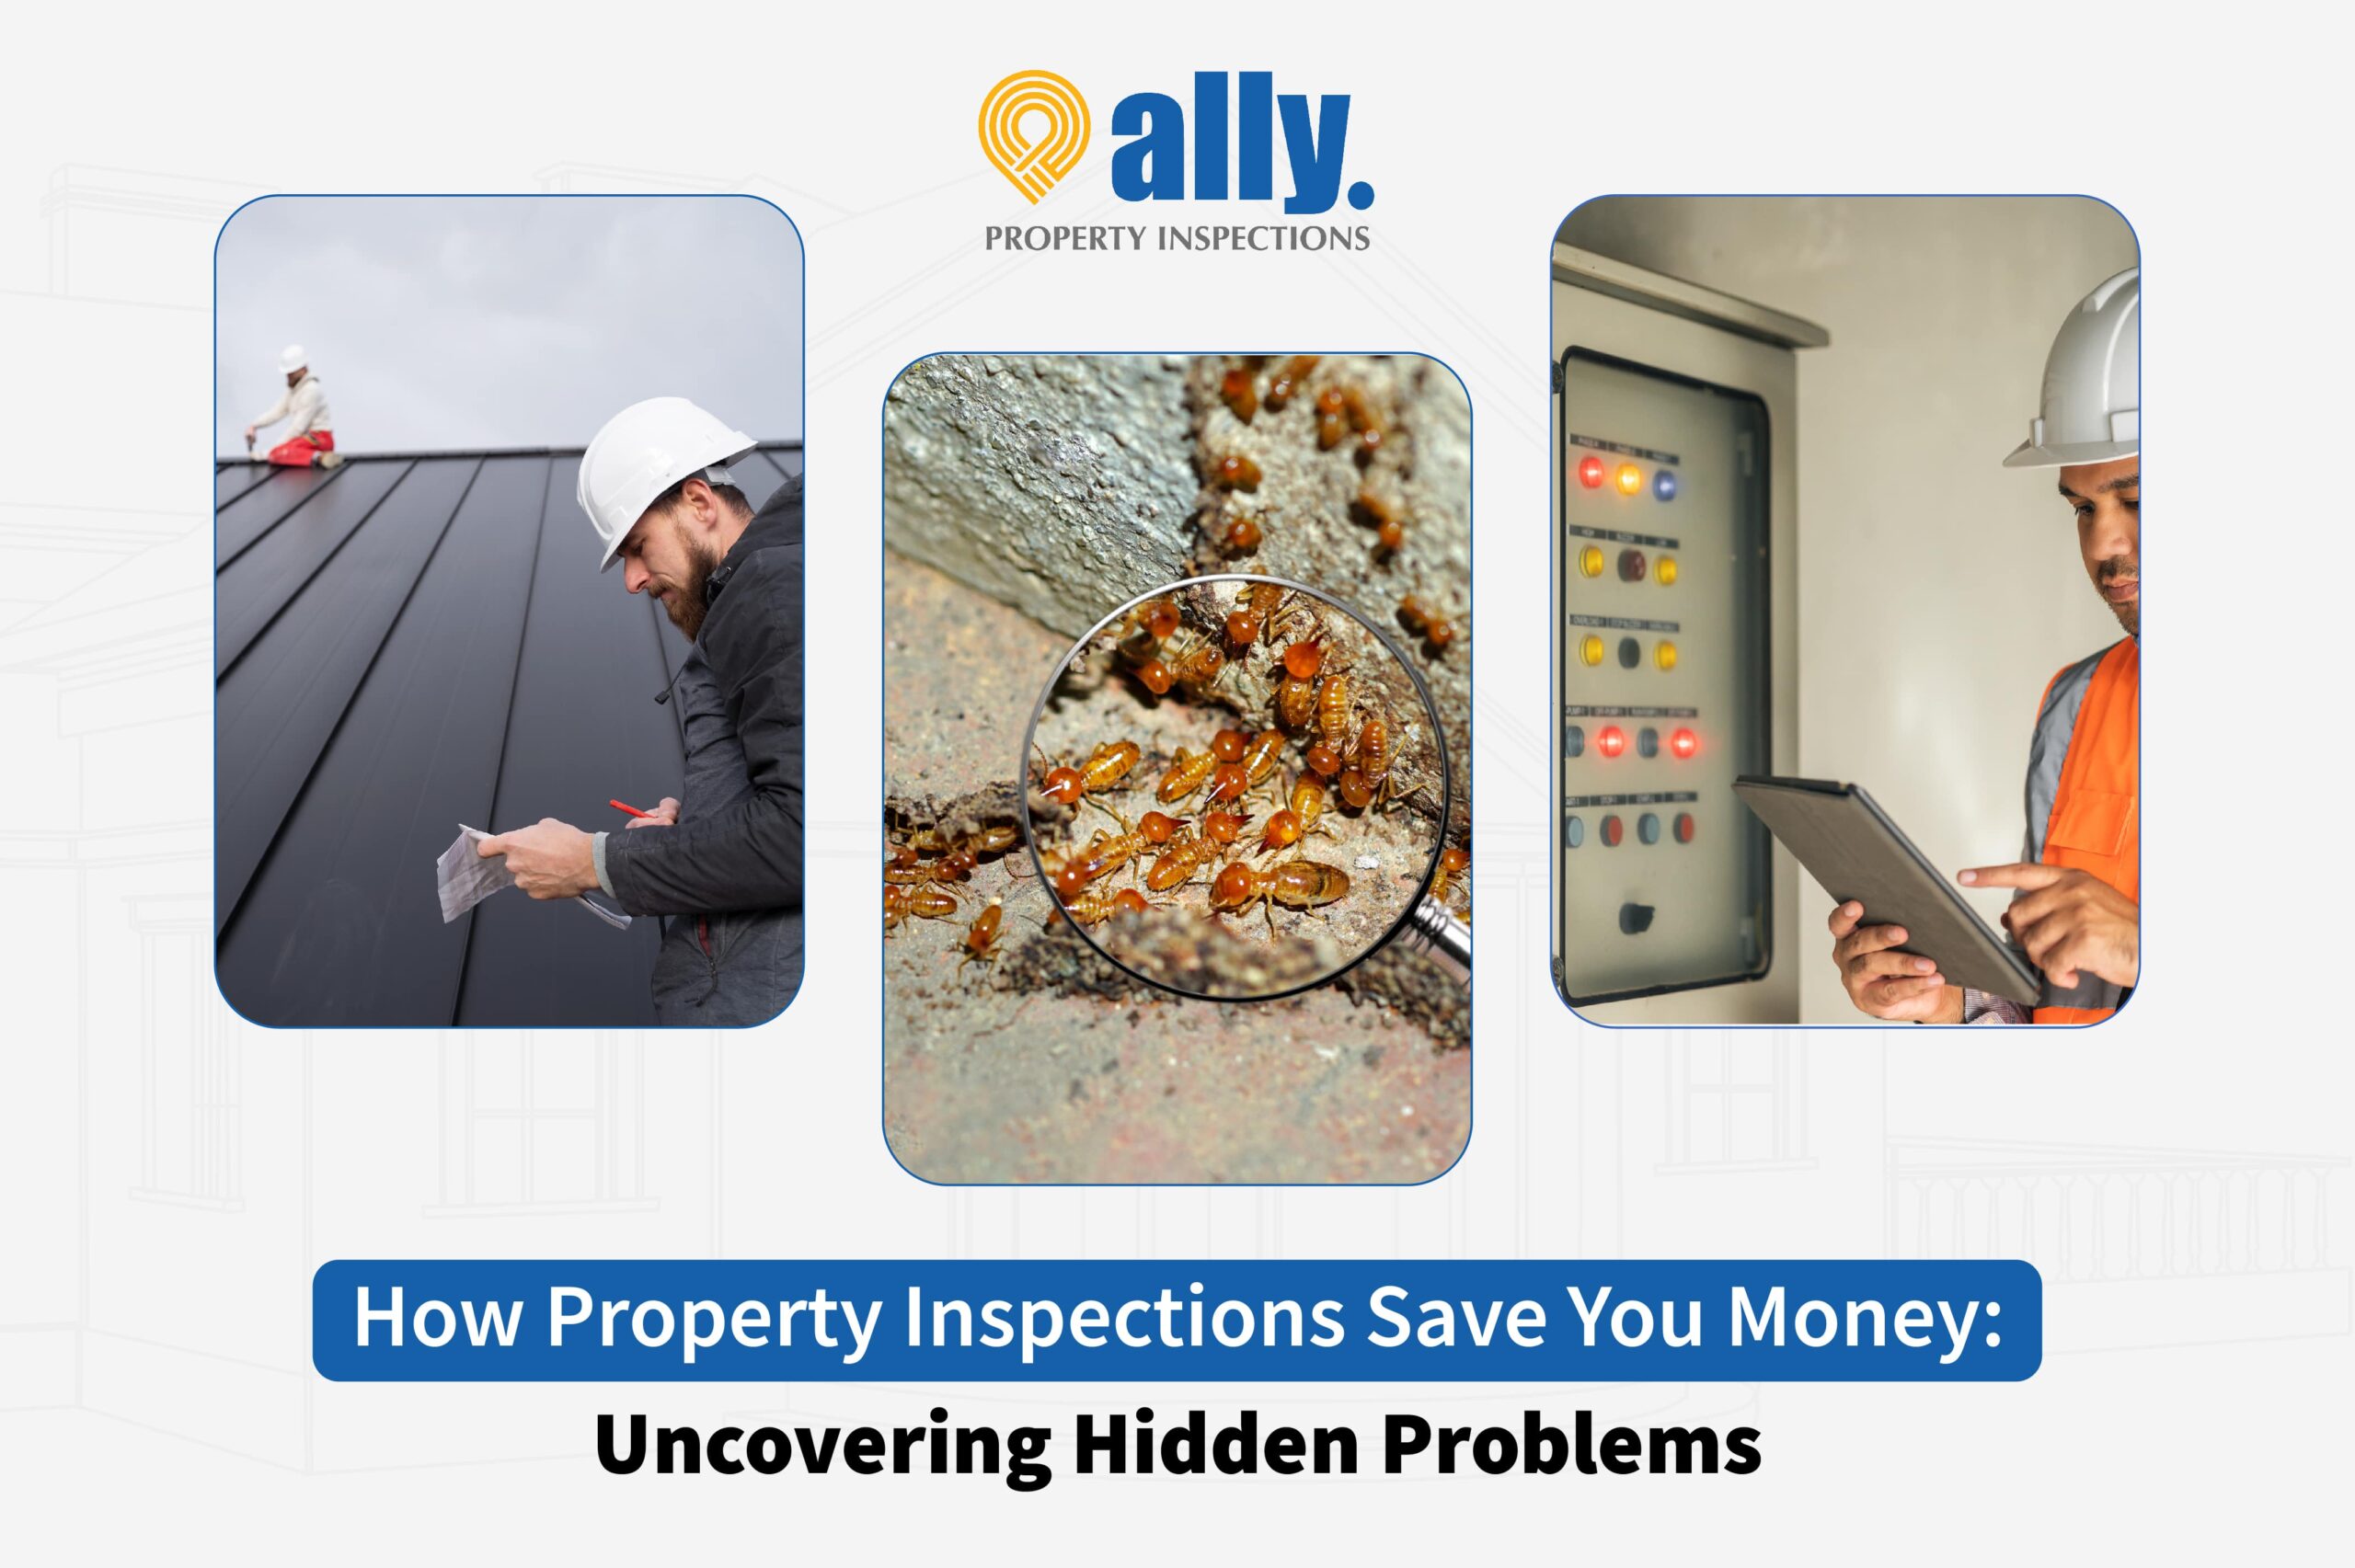 How Property Inspections Save You Money: Uncovering Hidden Problems